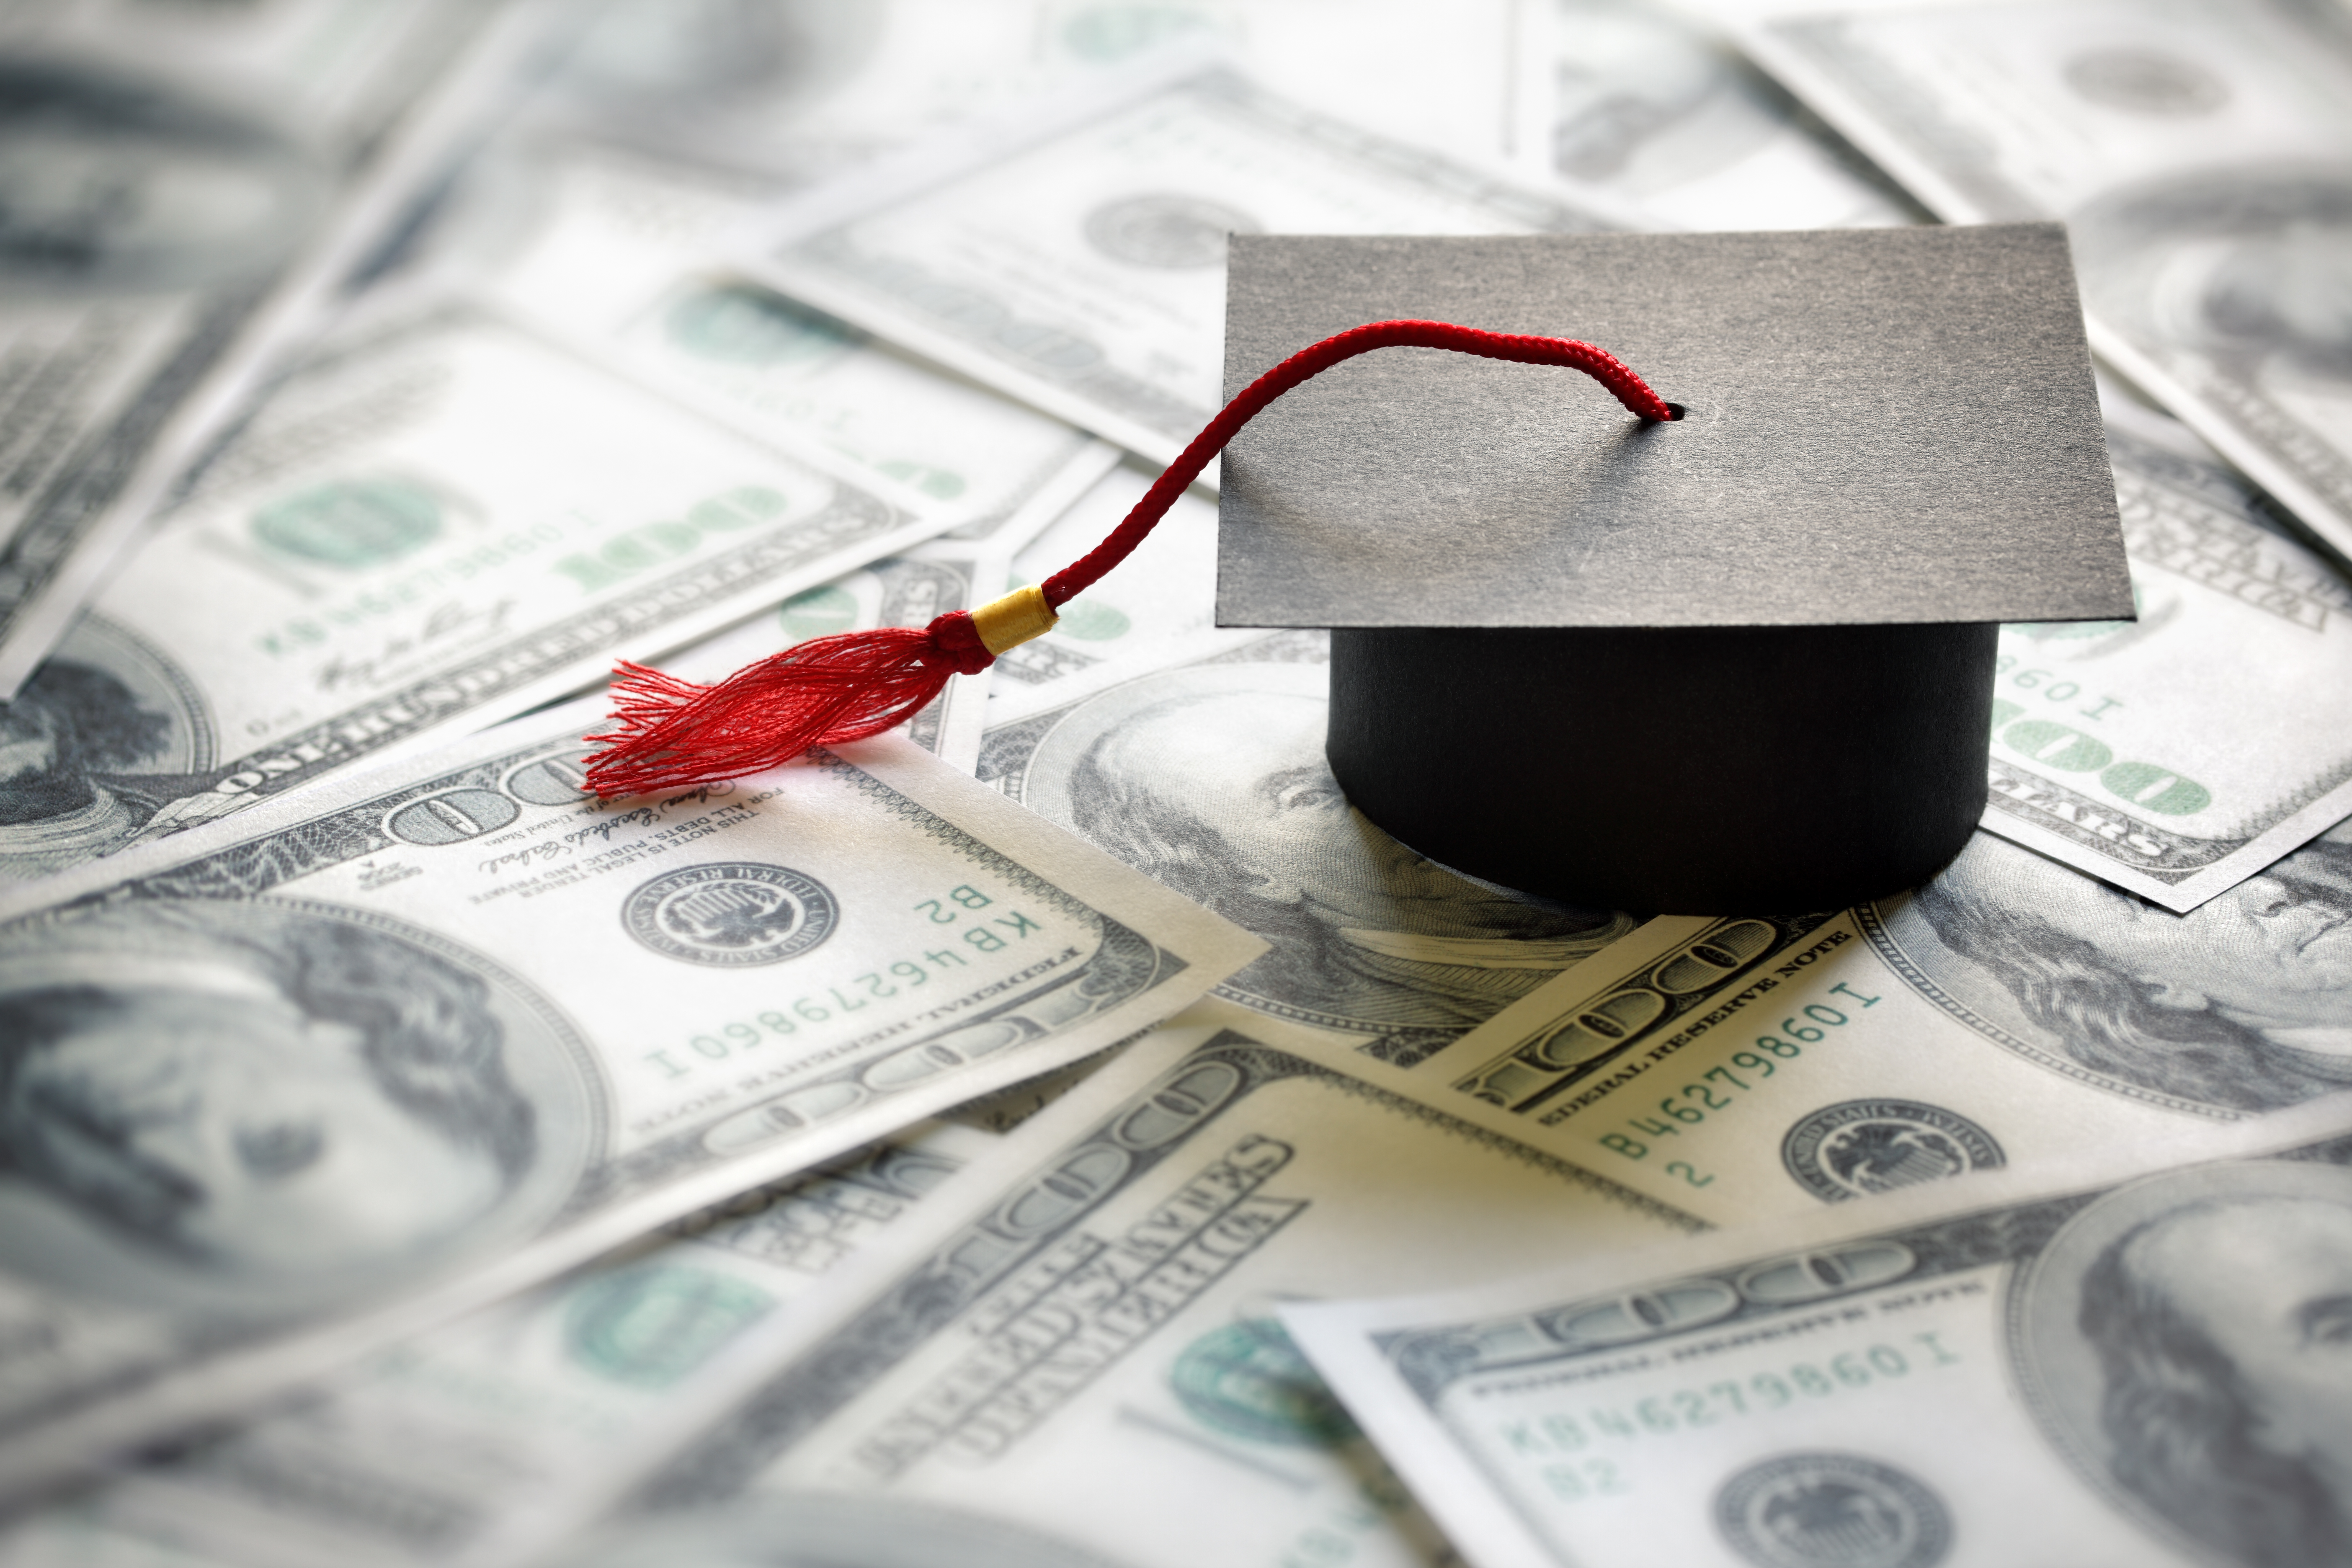 Federal Student Debt Consolidation Preparation Is Provided By NSA Care. Call Us At 888-350-7549